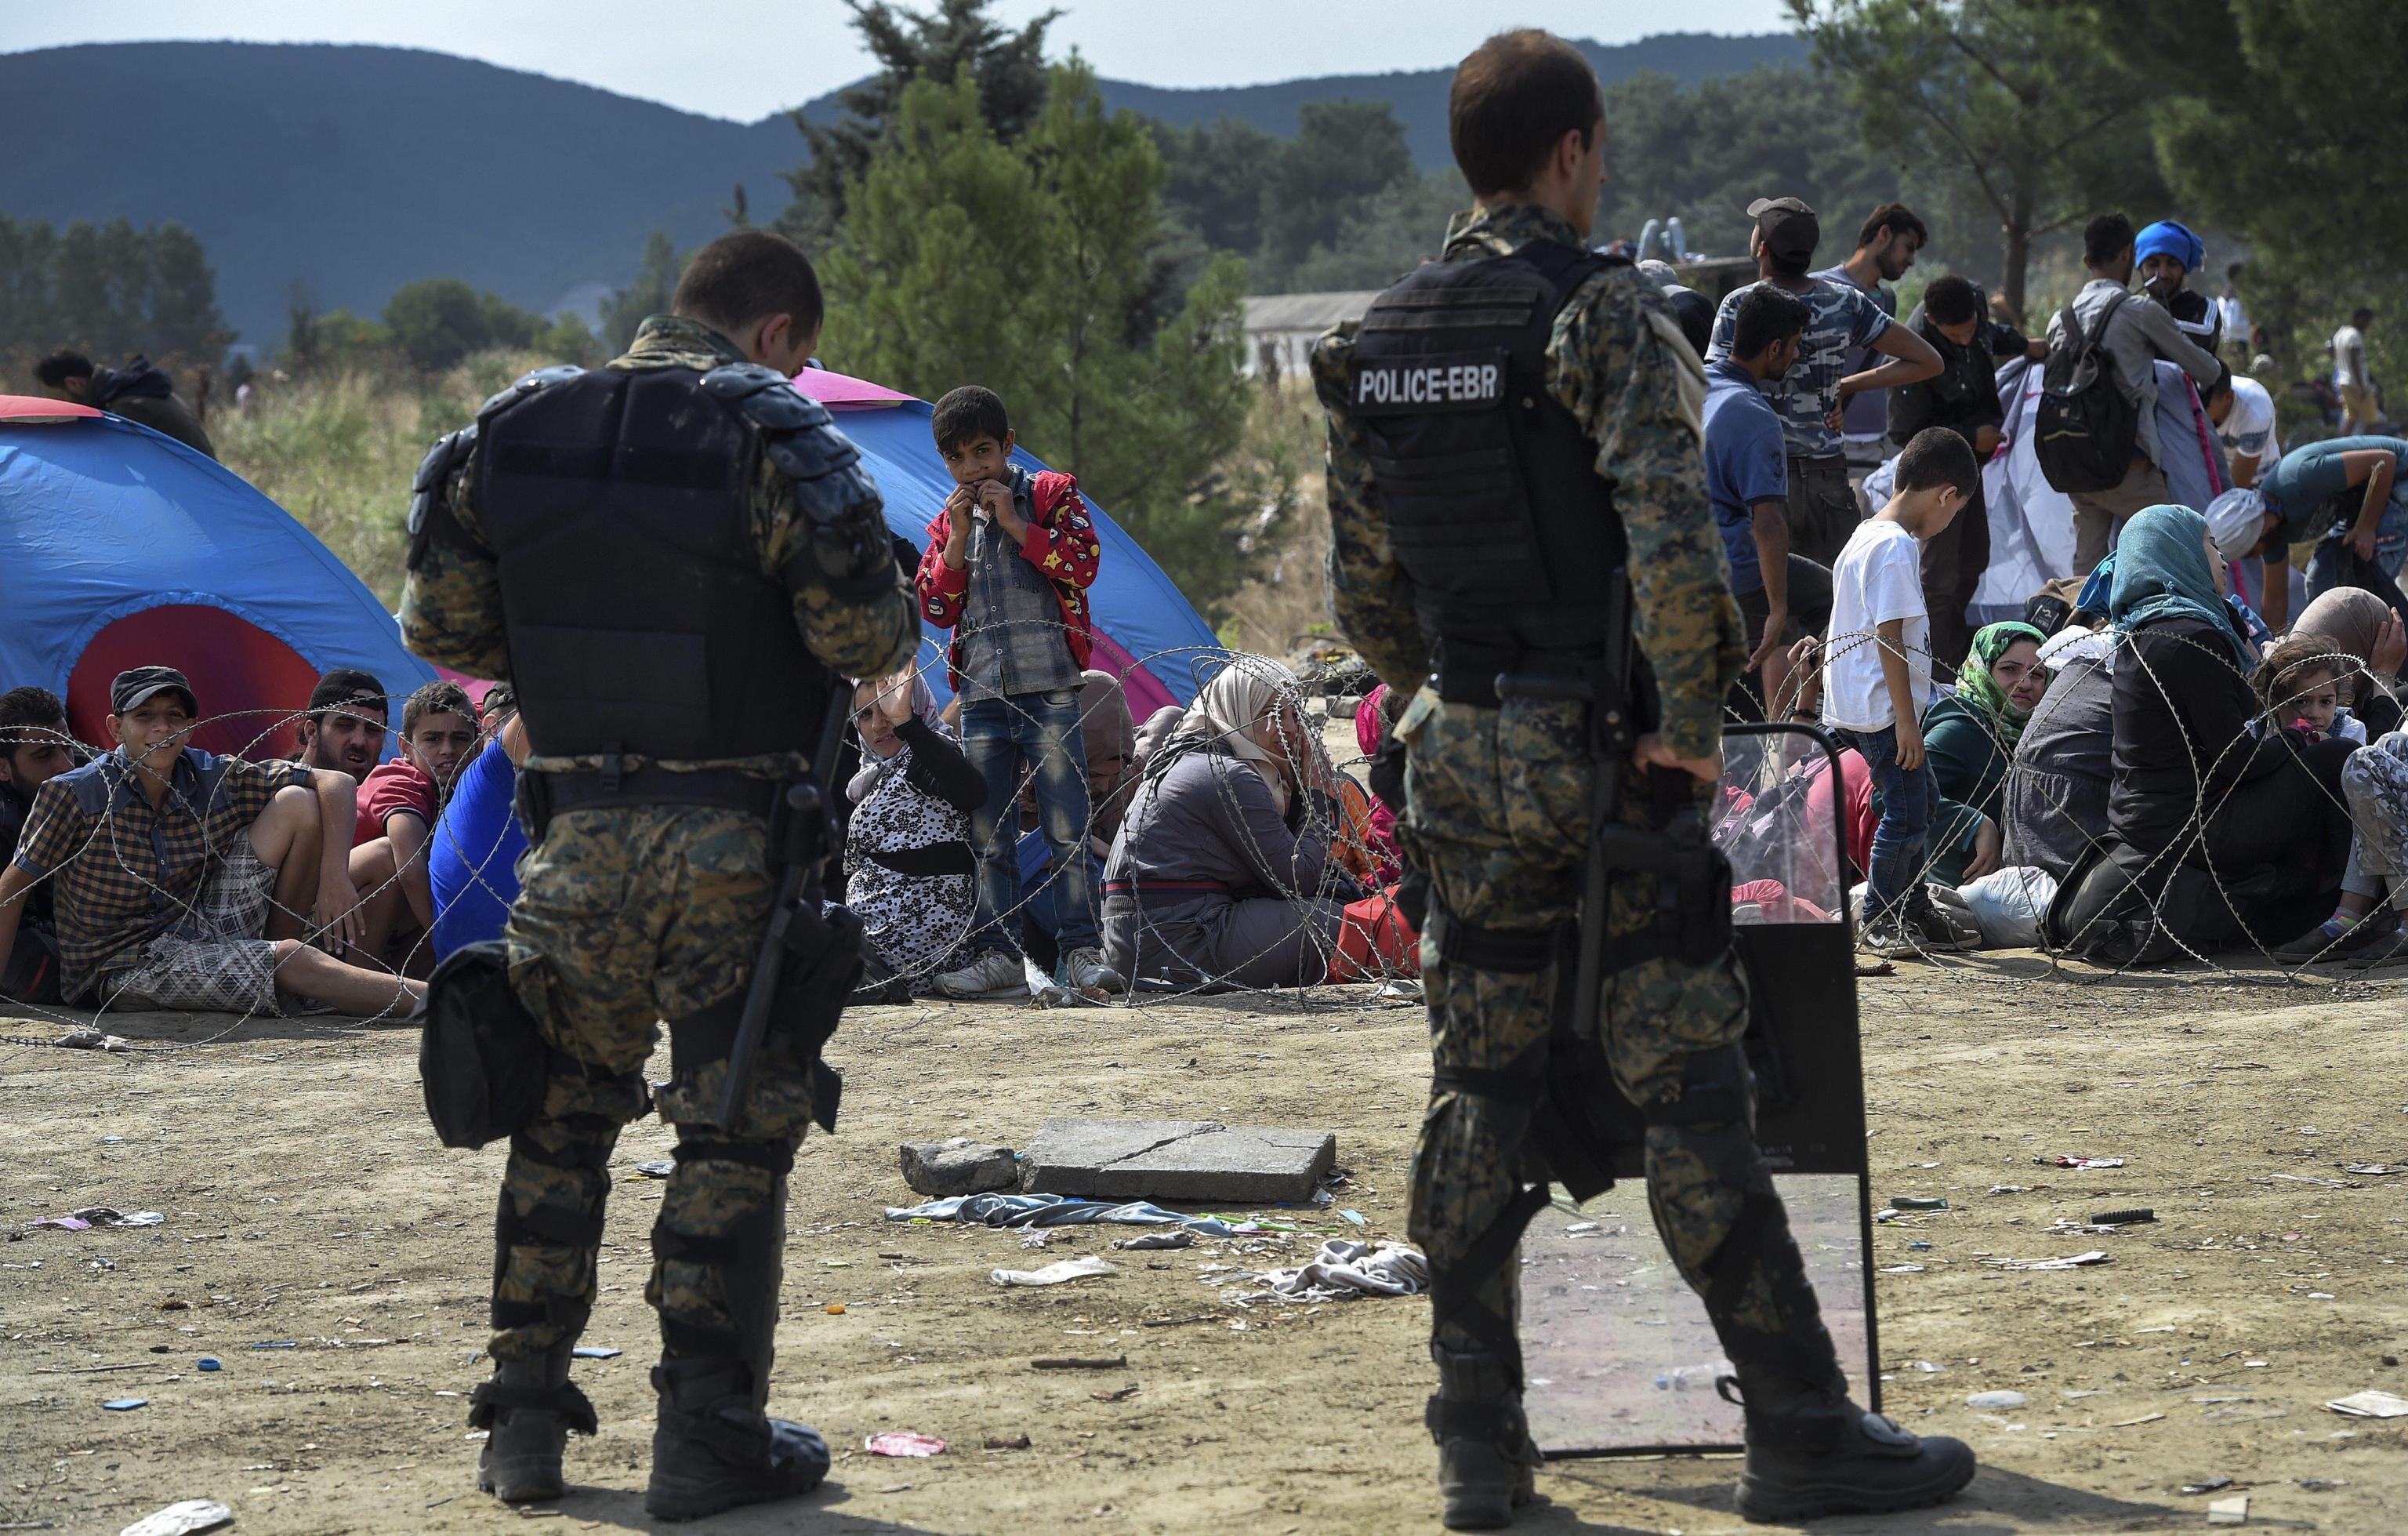 Macedonian police clashed with Middle Eastern refugees